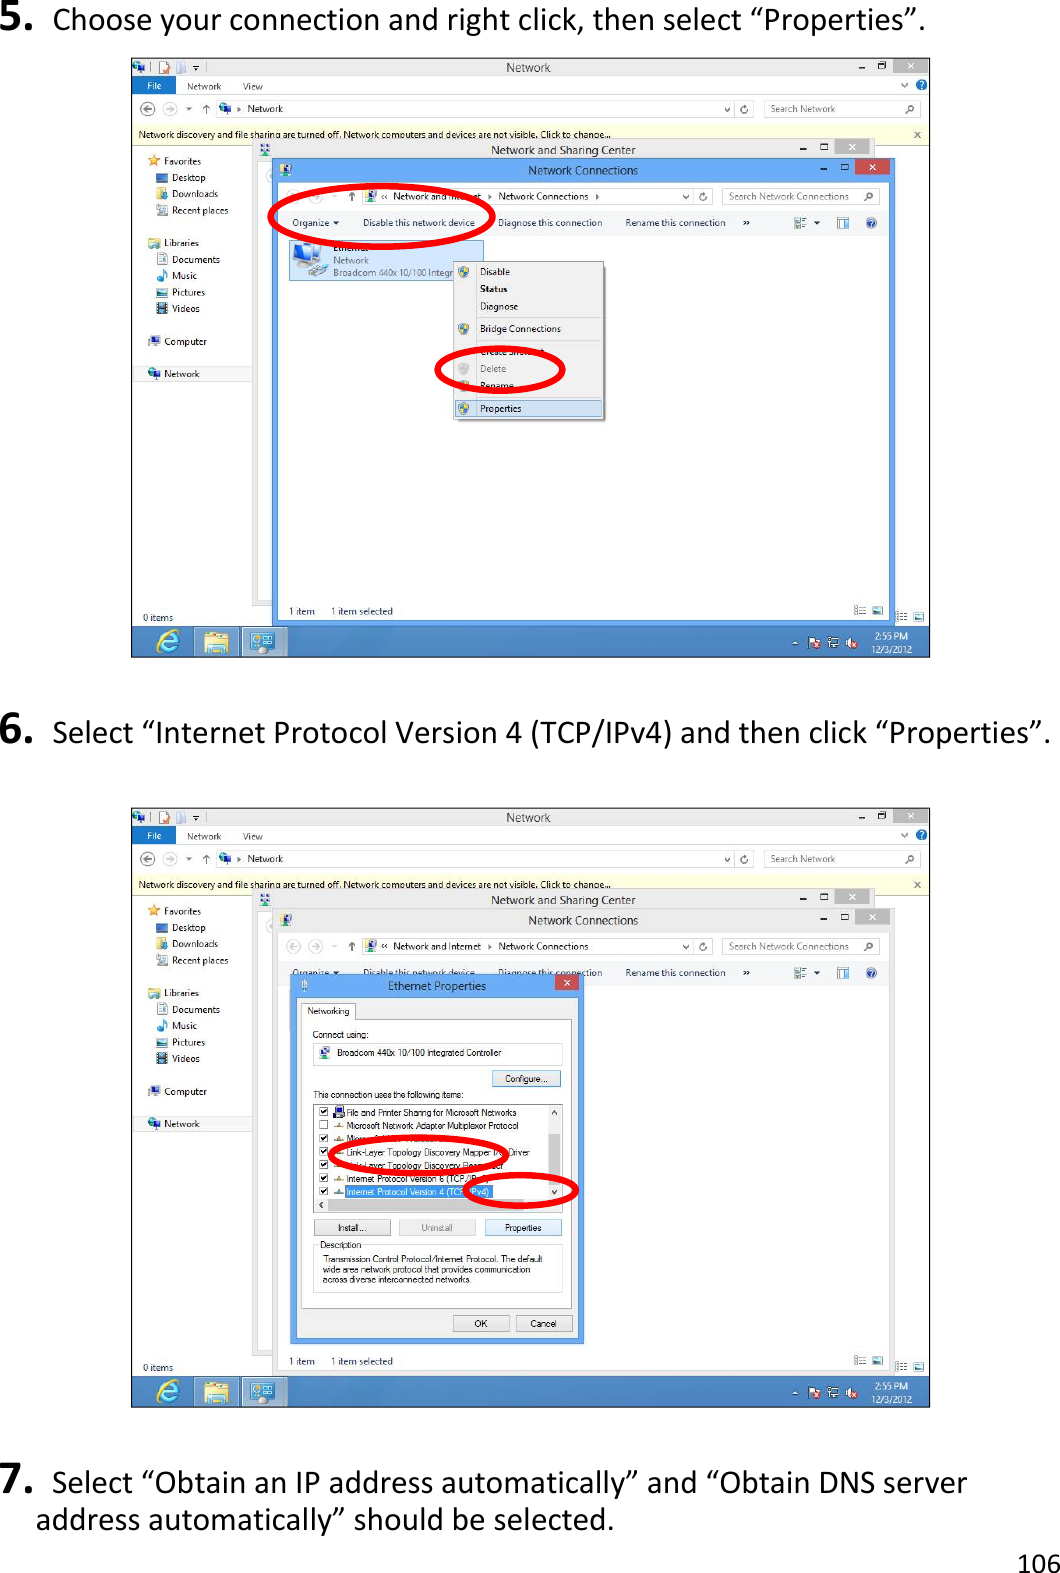 106  5.   Choose your connection and right click, then select “Properties”.   6.   Select “Internet Protocol Version 4 (TCP/IPv4) and then click “Properties”.    7.   Select “Obtain an IP address automatically” and “Obtain DNS server address automatically” should be selected. 